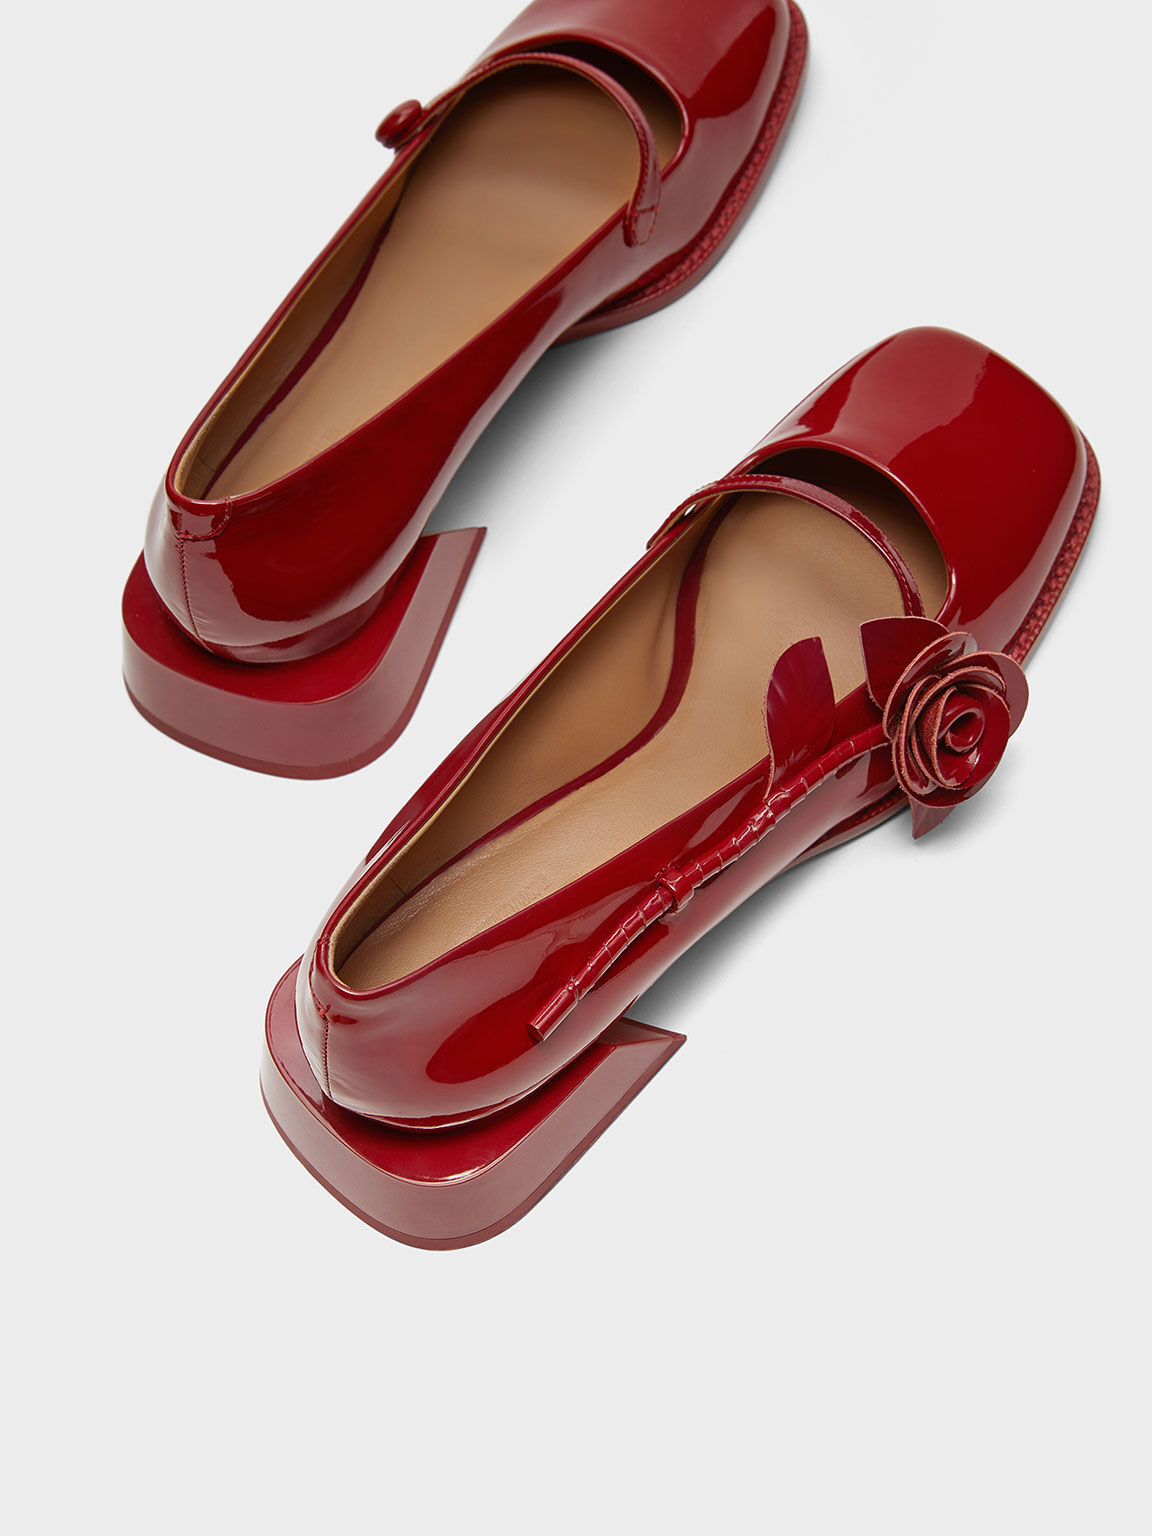 SHUSHU/TONG x CHARLES & KEITH: Chloris Patent Leather Rose-Embellished Mary Jane Pumps, Red, hi-res